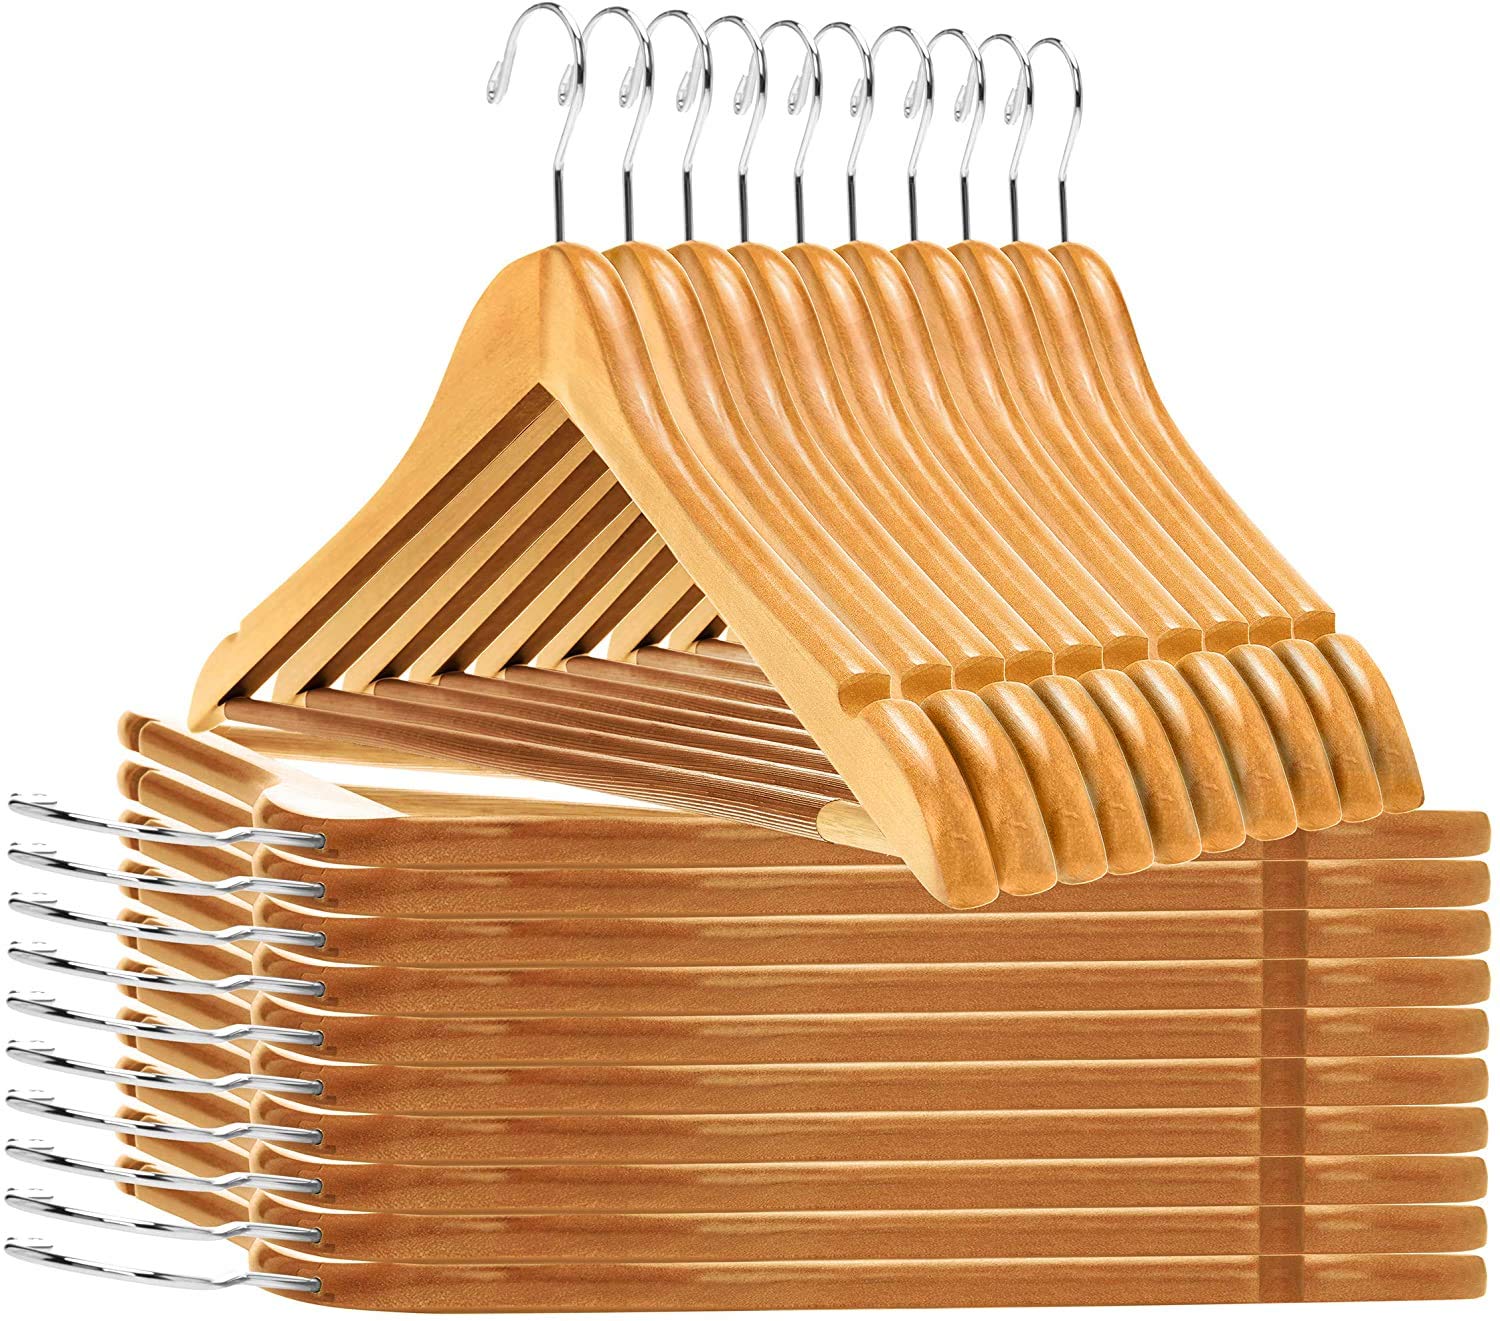 Quality Wooden Hangers - Slightly Curved Hanger 30-Pack Sets - Solid Wood Coat Hangers with Stylish Chrome Hooks - Heavy-Duty Clothes, Jacket, Shir...